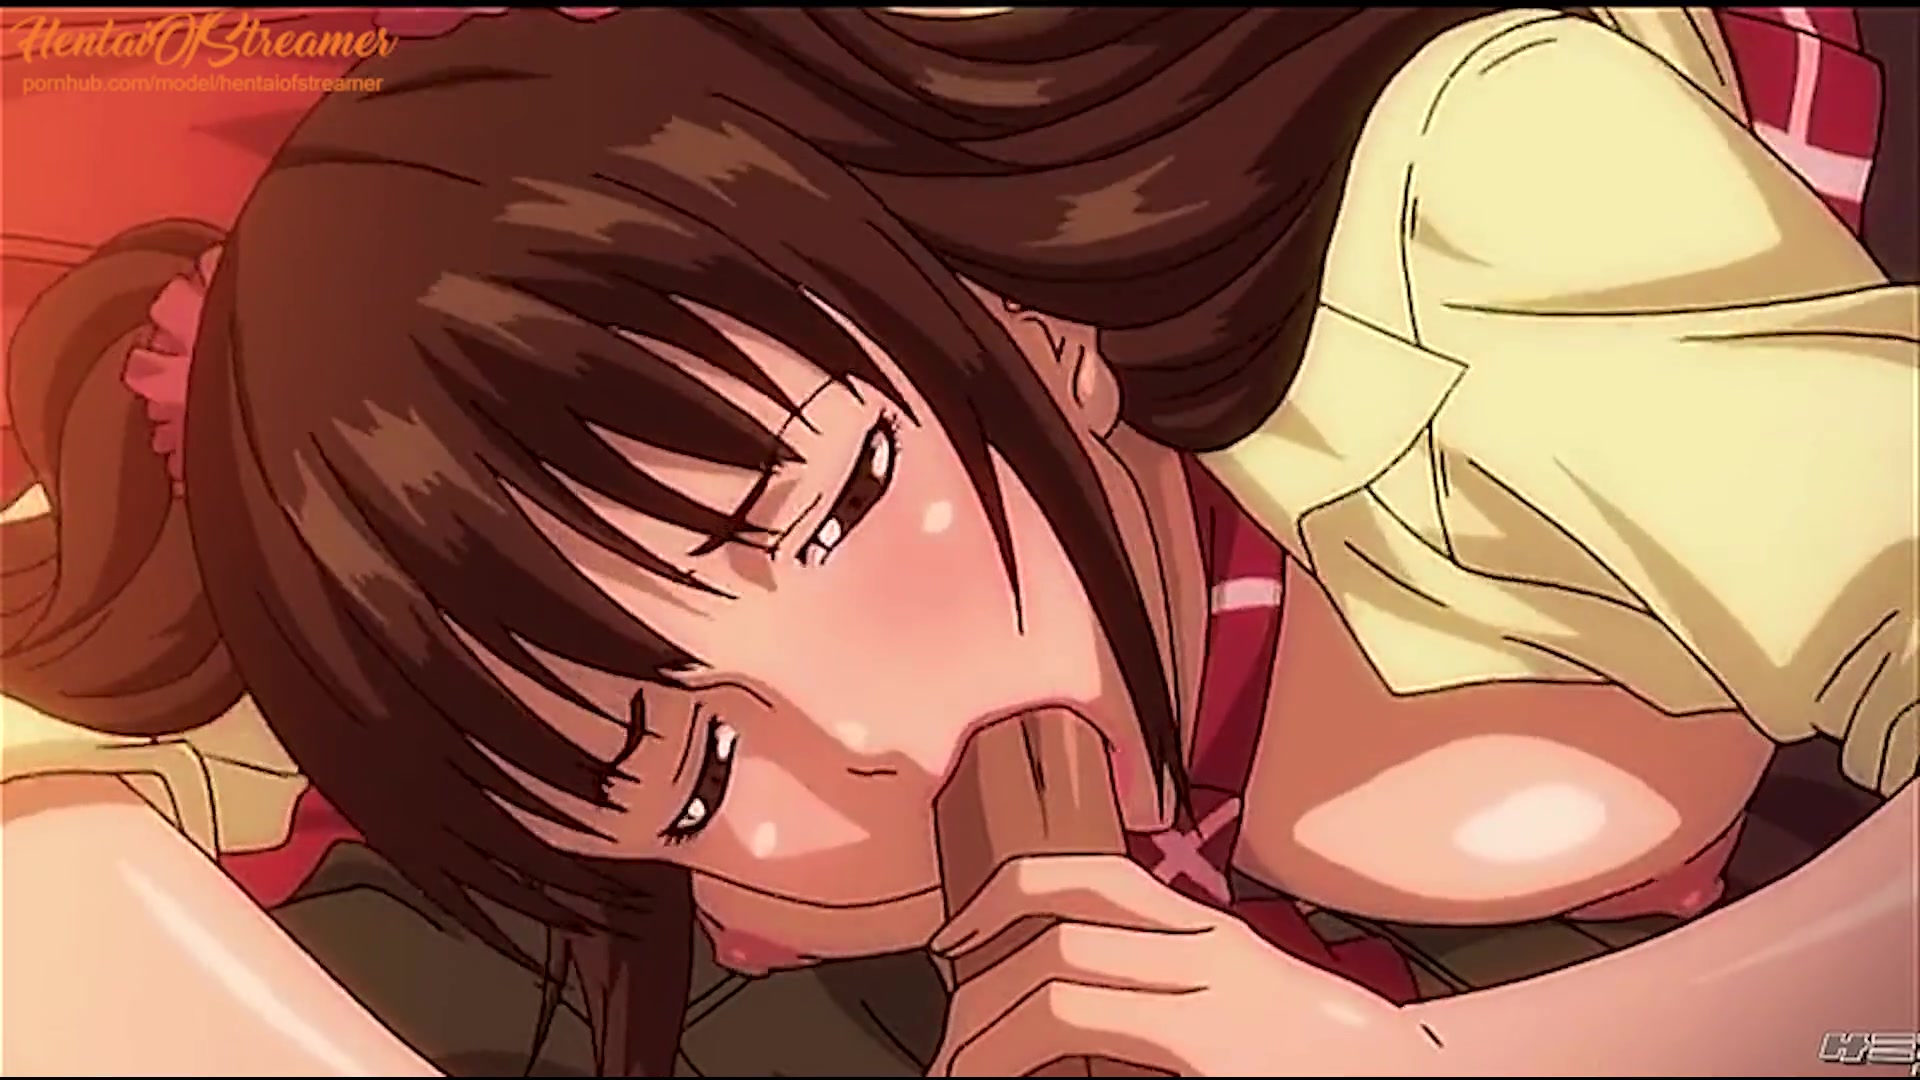 Anime Porn Uncensored - Hotwife Dude Sees his Gf Plumb and Deep-Throat off another Stud - Anime Porn, Anime image